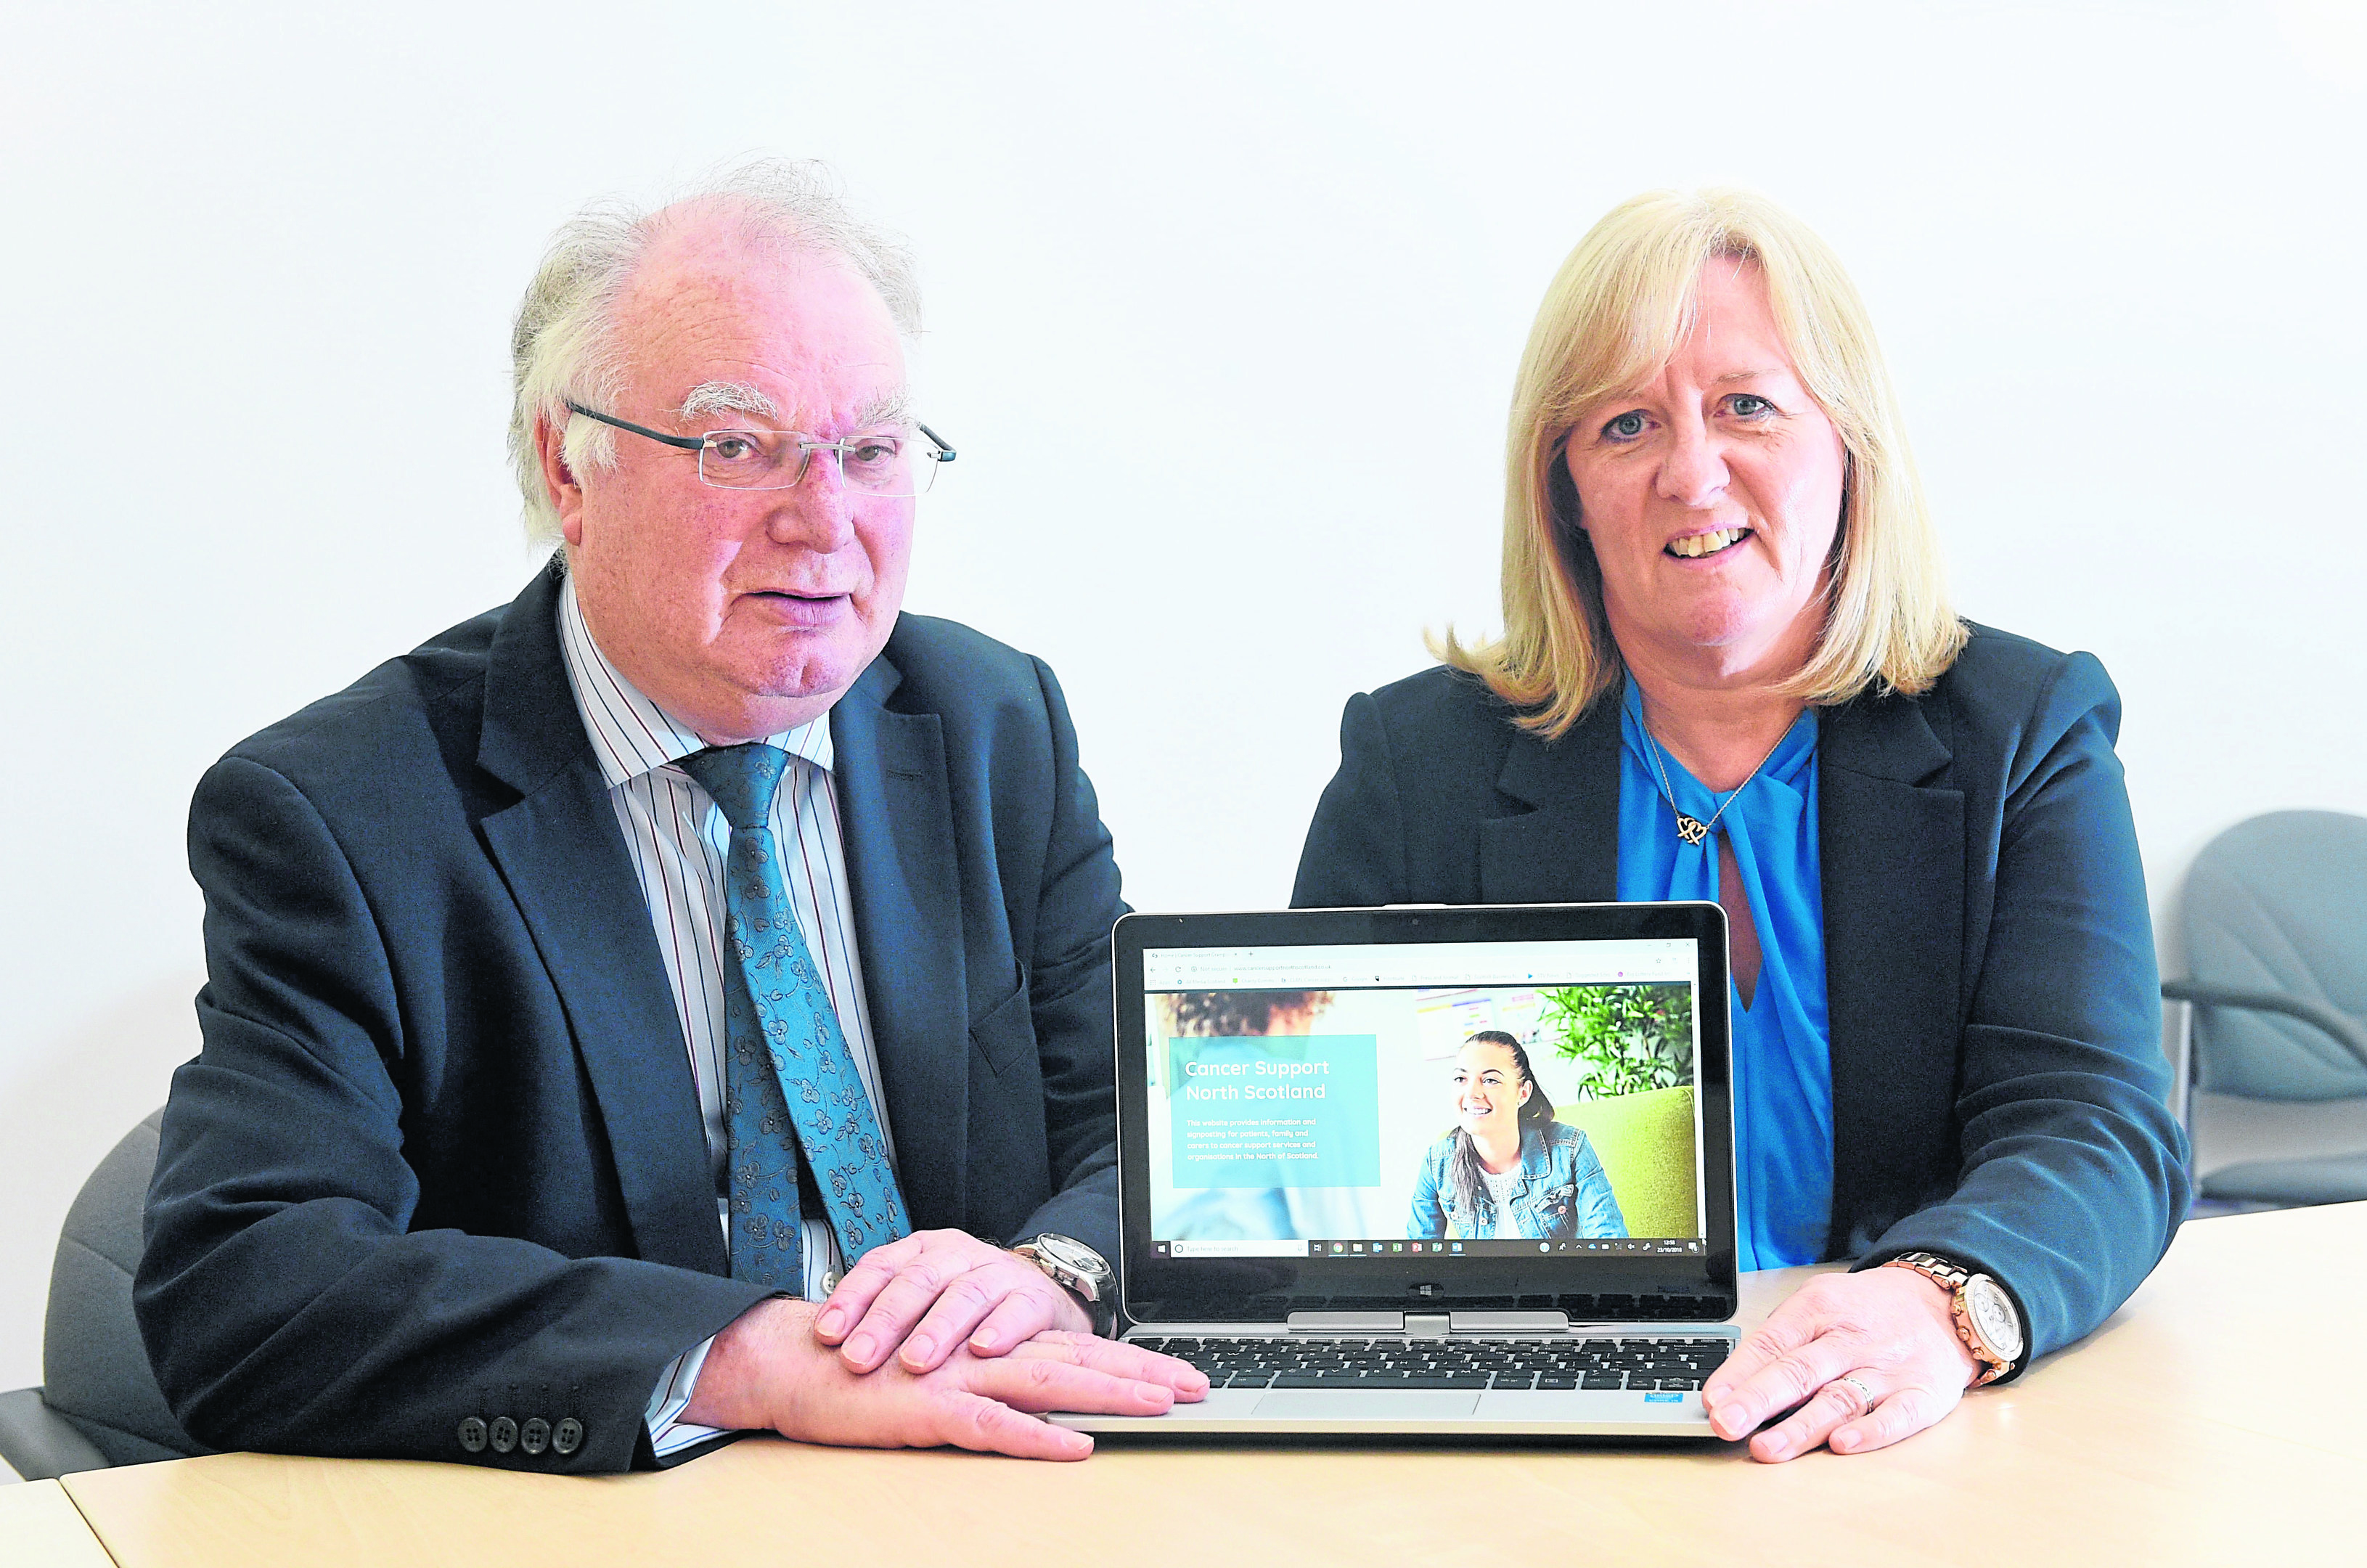 Professor Stephen Logan and Dr Colette Backwell at the launch of an online cancer resource at Clan Cancer Support, Aberdeen.